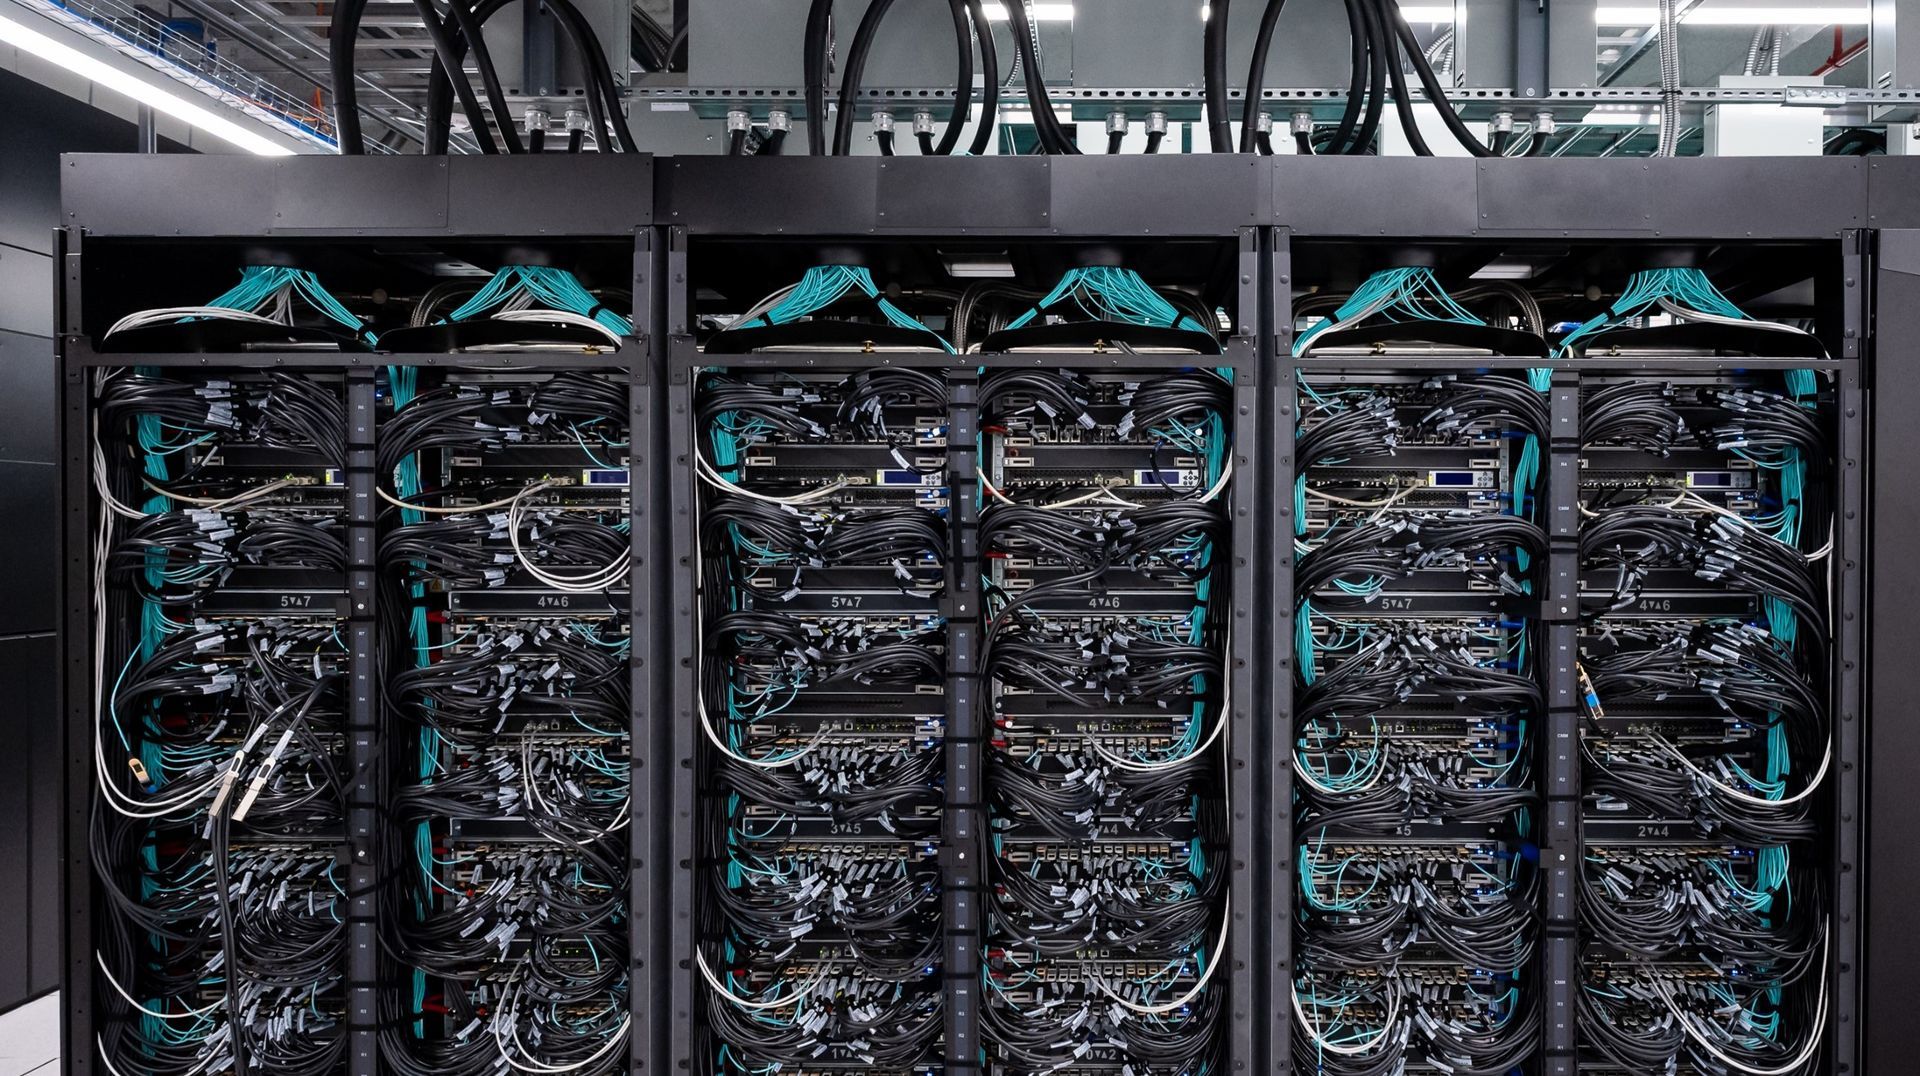 The Frontier Supercomputer Has Reached Exascale Computing Power, It Can Process A Quintillion Operations Per Second.